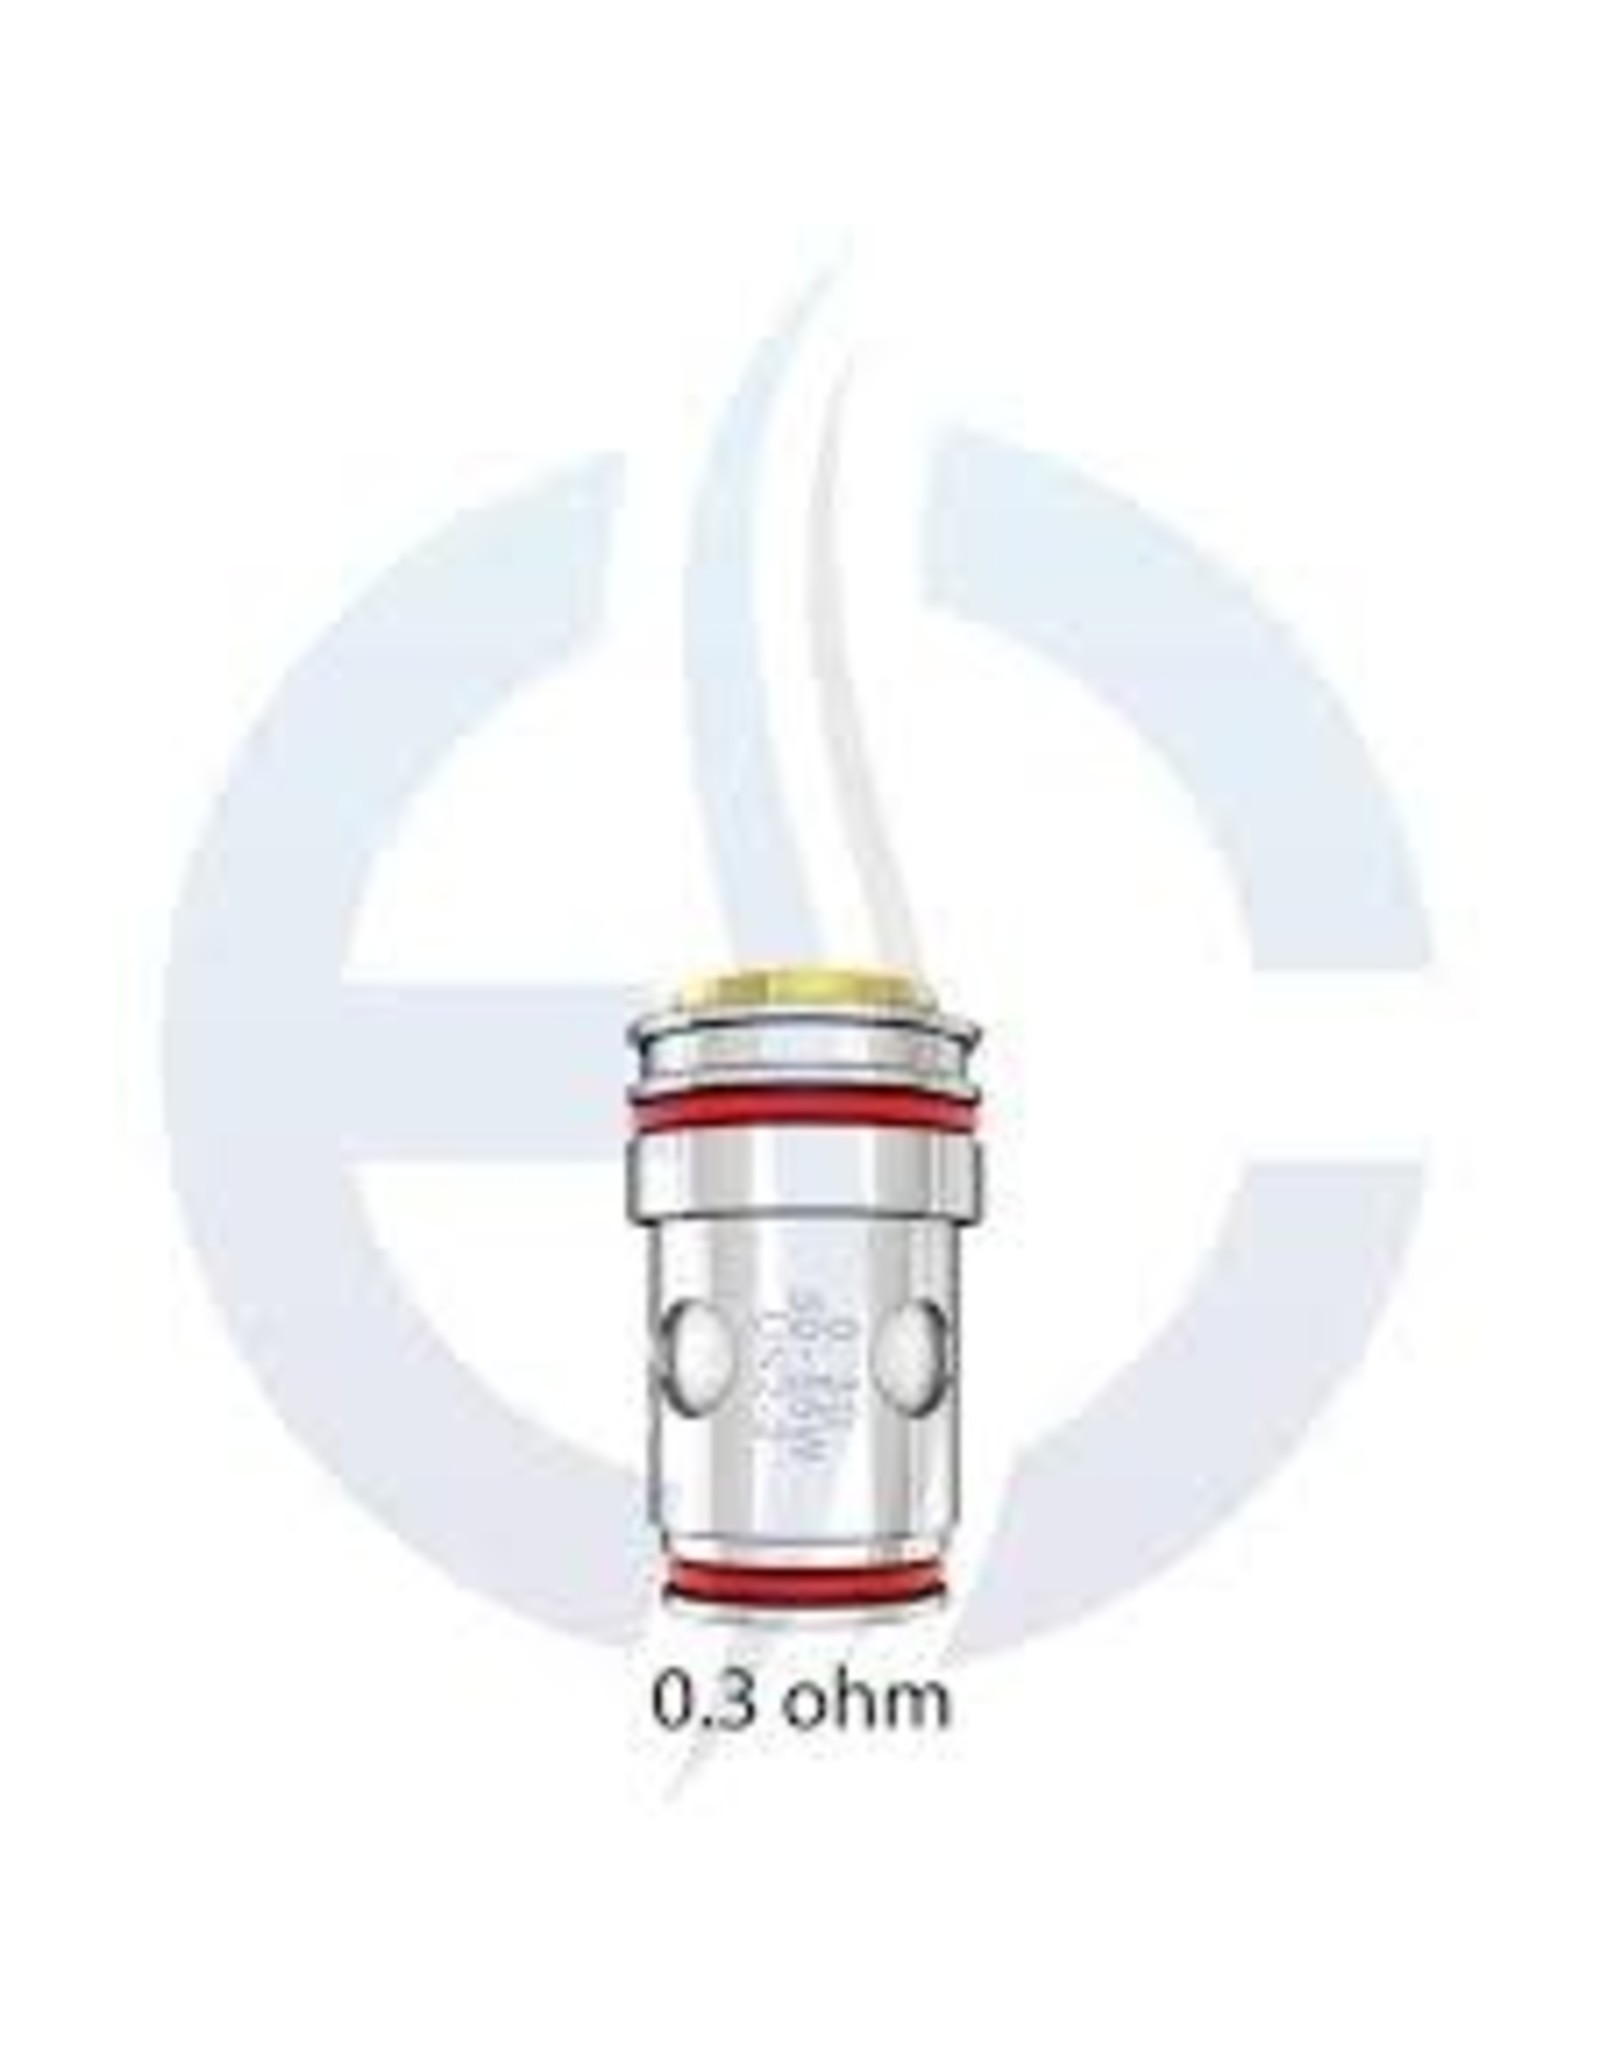 Uwell Uwell Crown 5 UN2 Mesh Coil 0.3 (1pc) Uwell Crown v